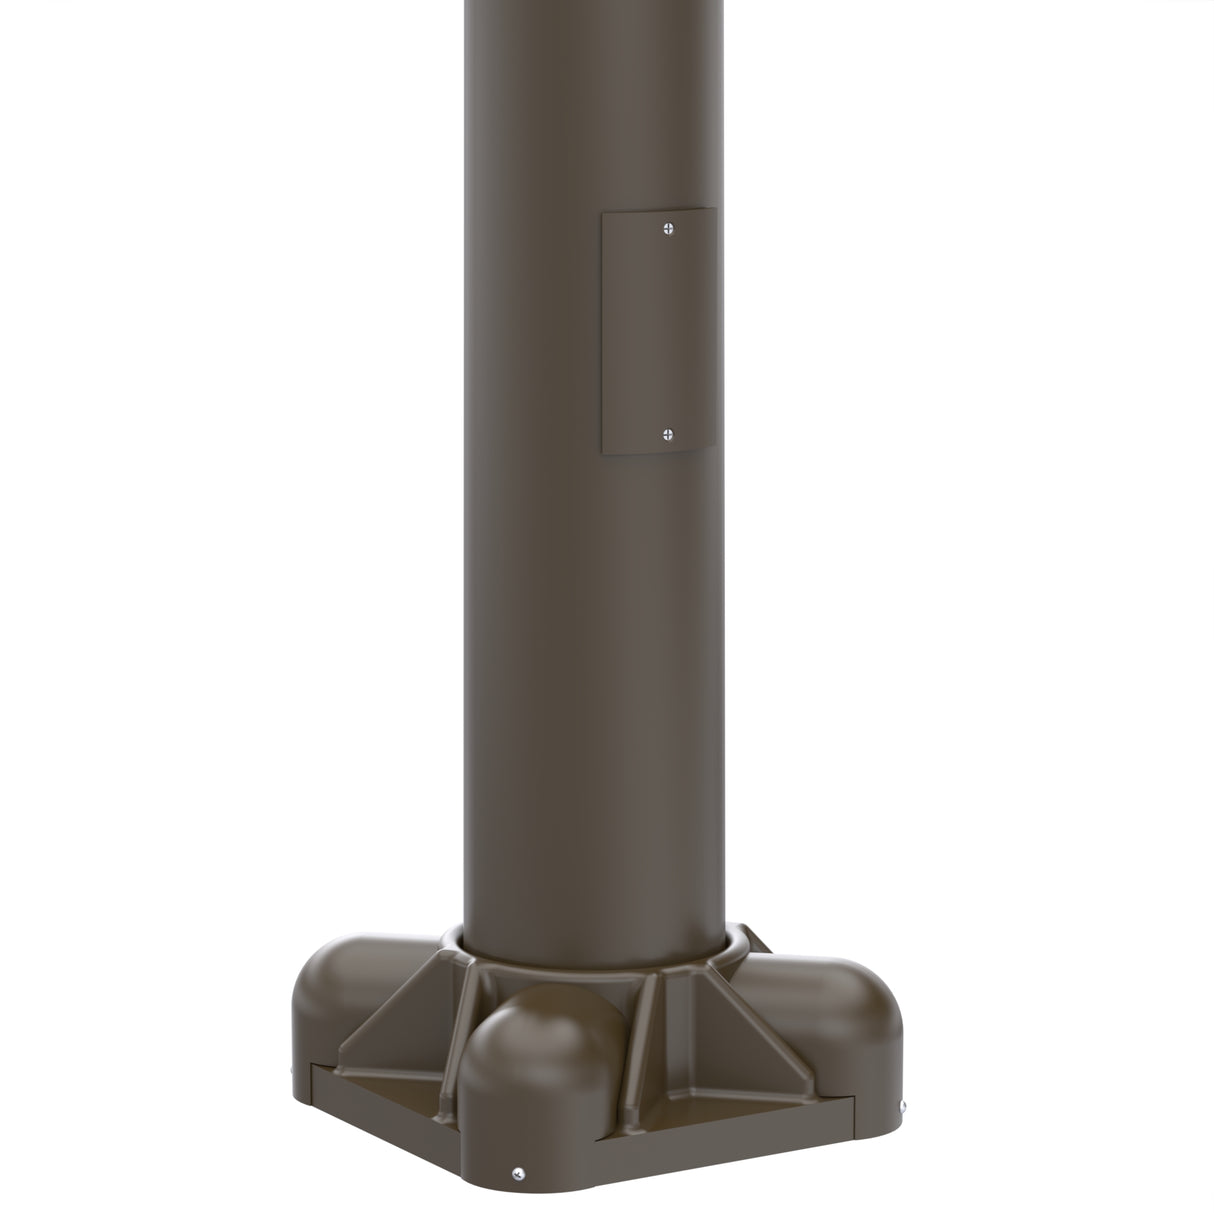 23' Tall x 7.0" Base OD x 4.0" Top OD x 0.156" Thick, Round Tapered Aluminum, Anchor Base Light Pole